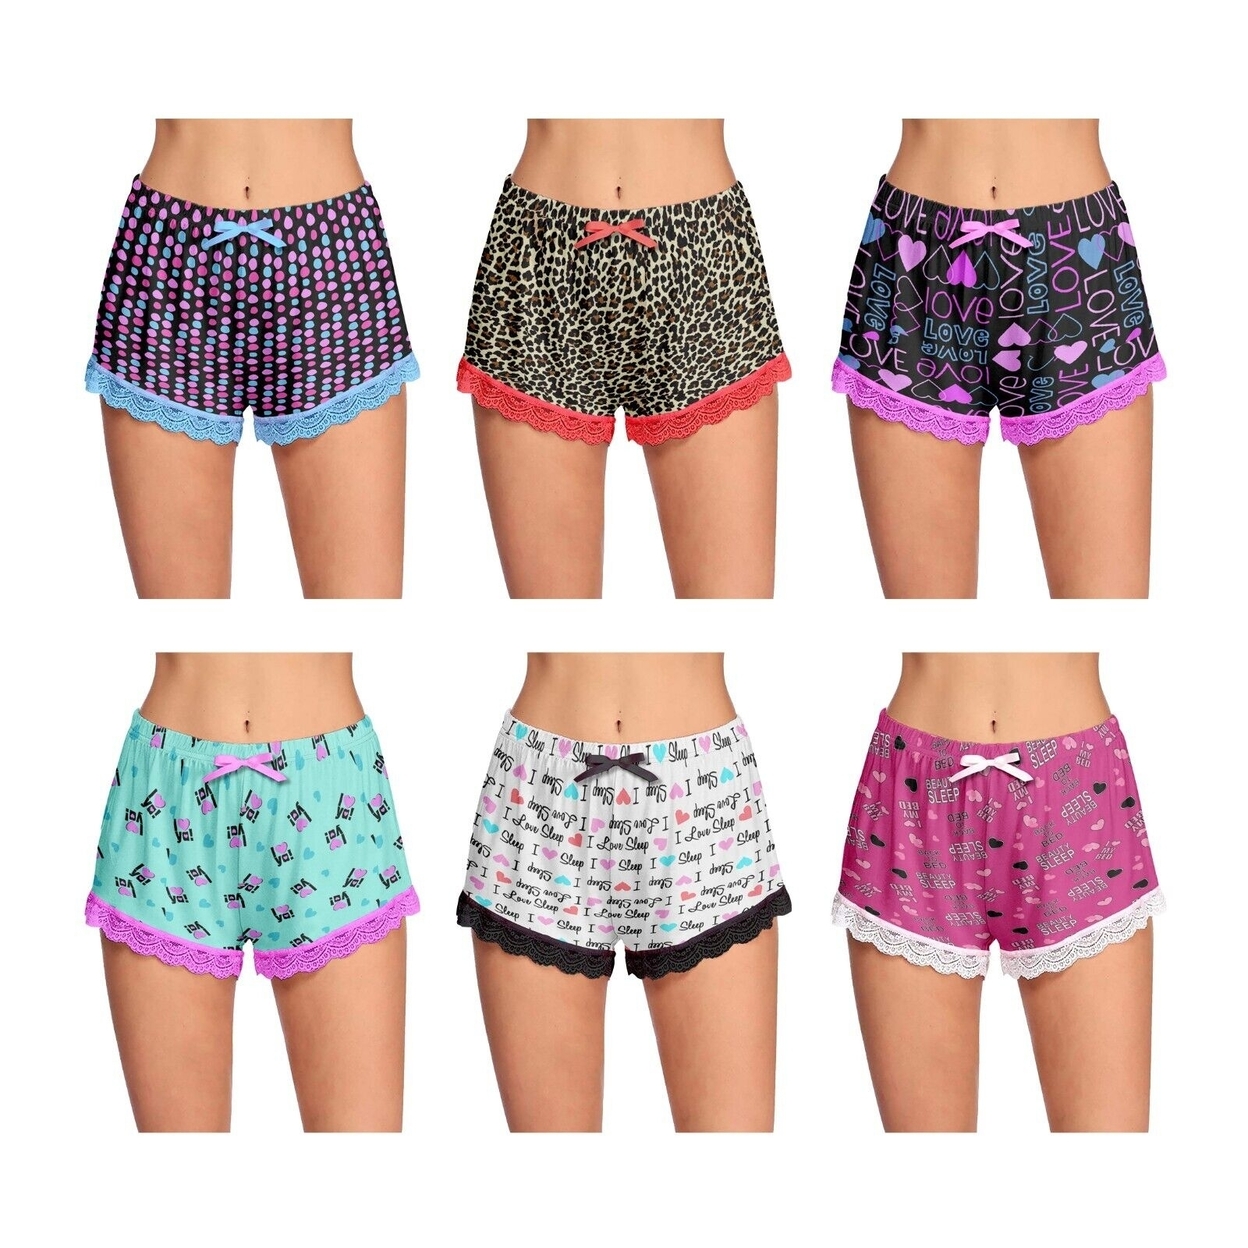 Multi-Pack: Women's Ultra-Soft Cozy Fun Printed Lace Trim Pajama Lounge Shorts - 2-pack, X-large, Shapes